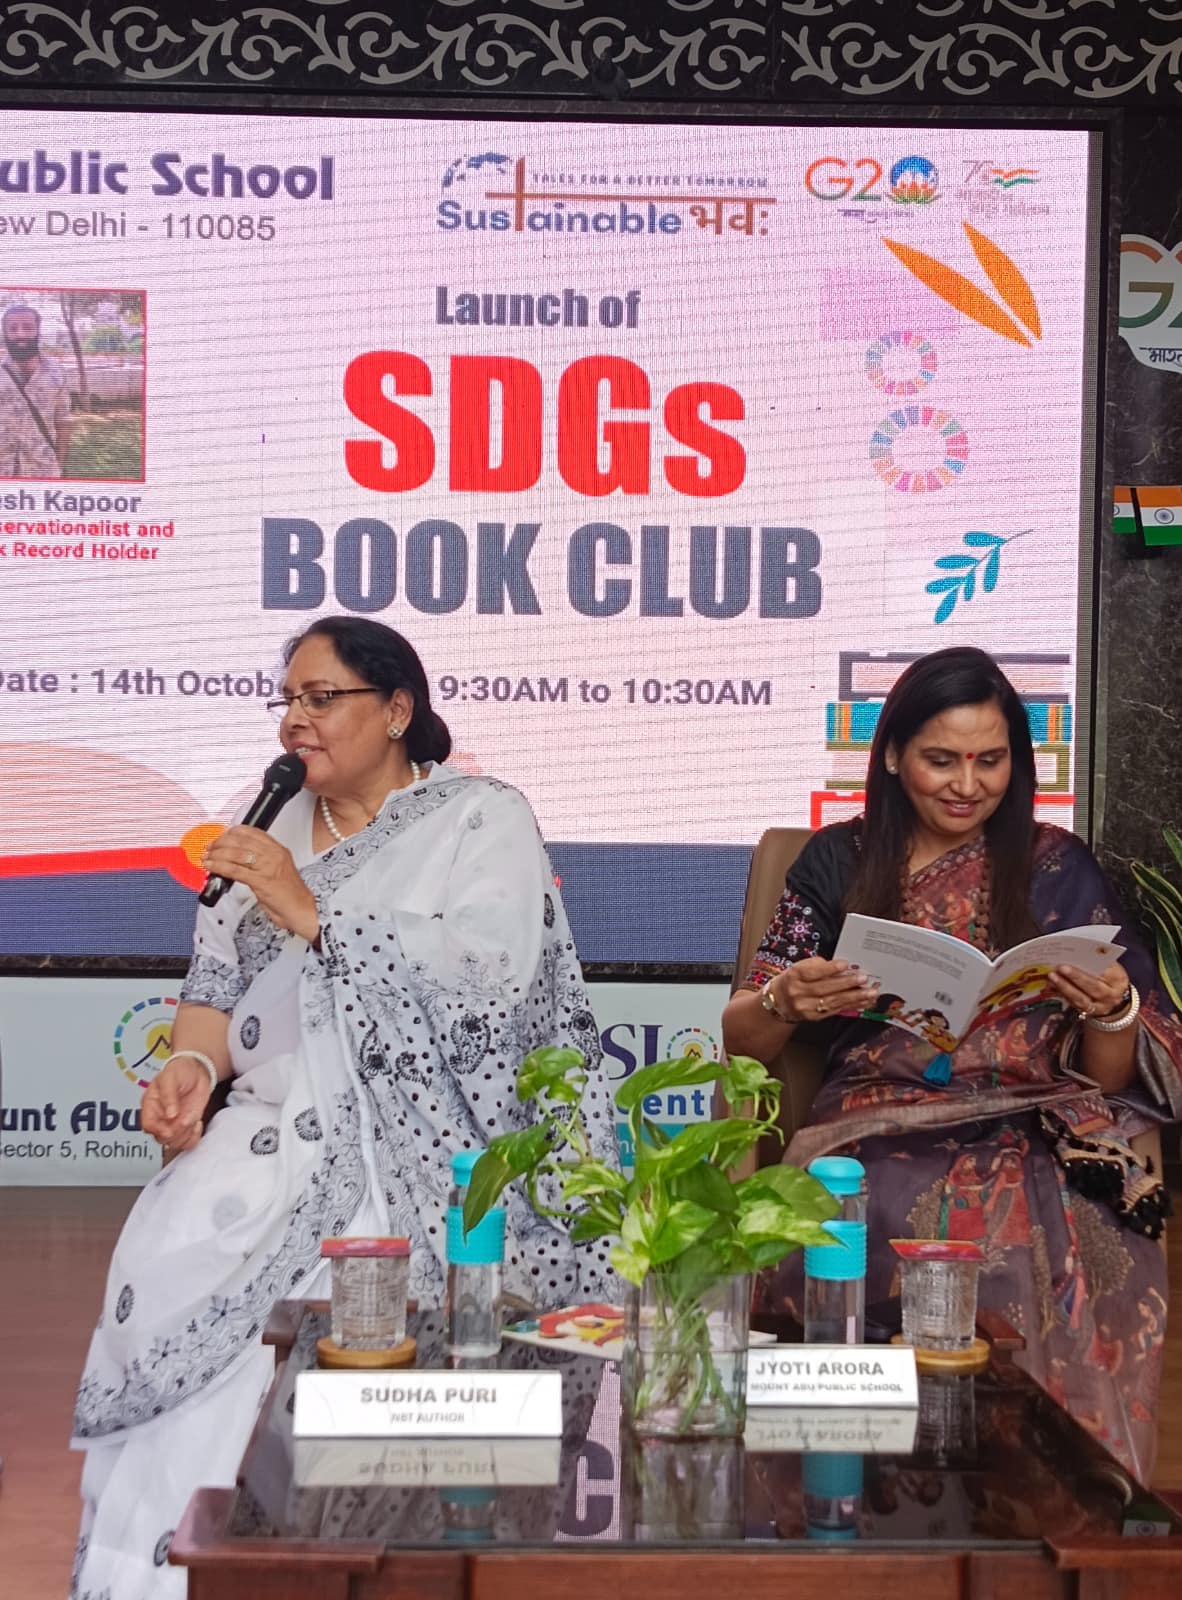 BOOK LAUNCH: HEROES DO NOT GROW ON TREES